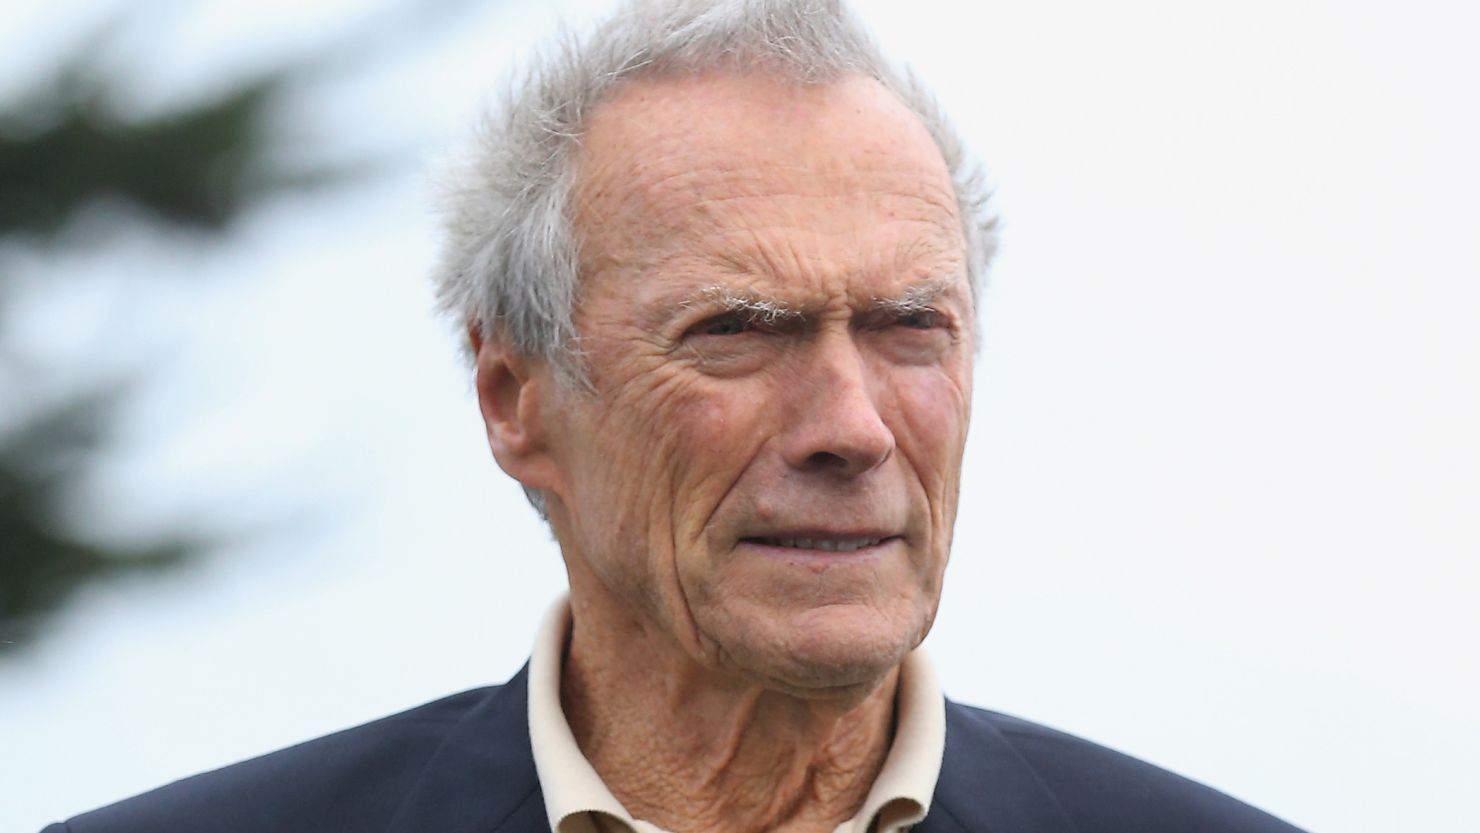 PEBBLE BEACH, CA - Clint Eastwood stands on the 18th green during the final round of the AT&T Pebble Beach National Pro-Am on February 9, 2014, in Pebble Beach, California. (Photo by Christian Petersen/Getty Images)